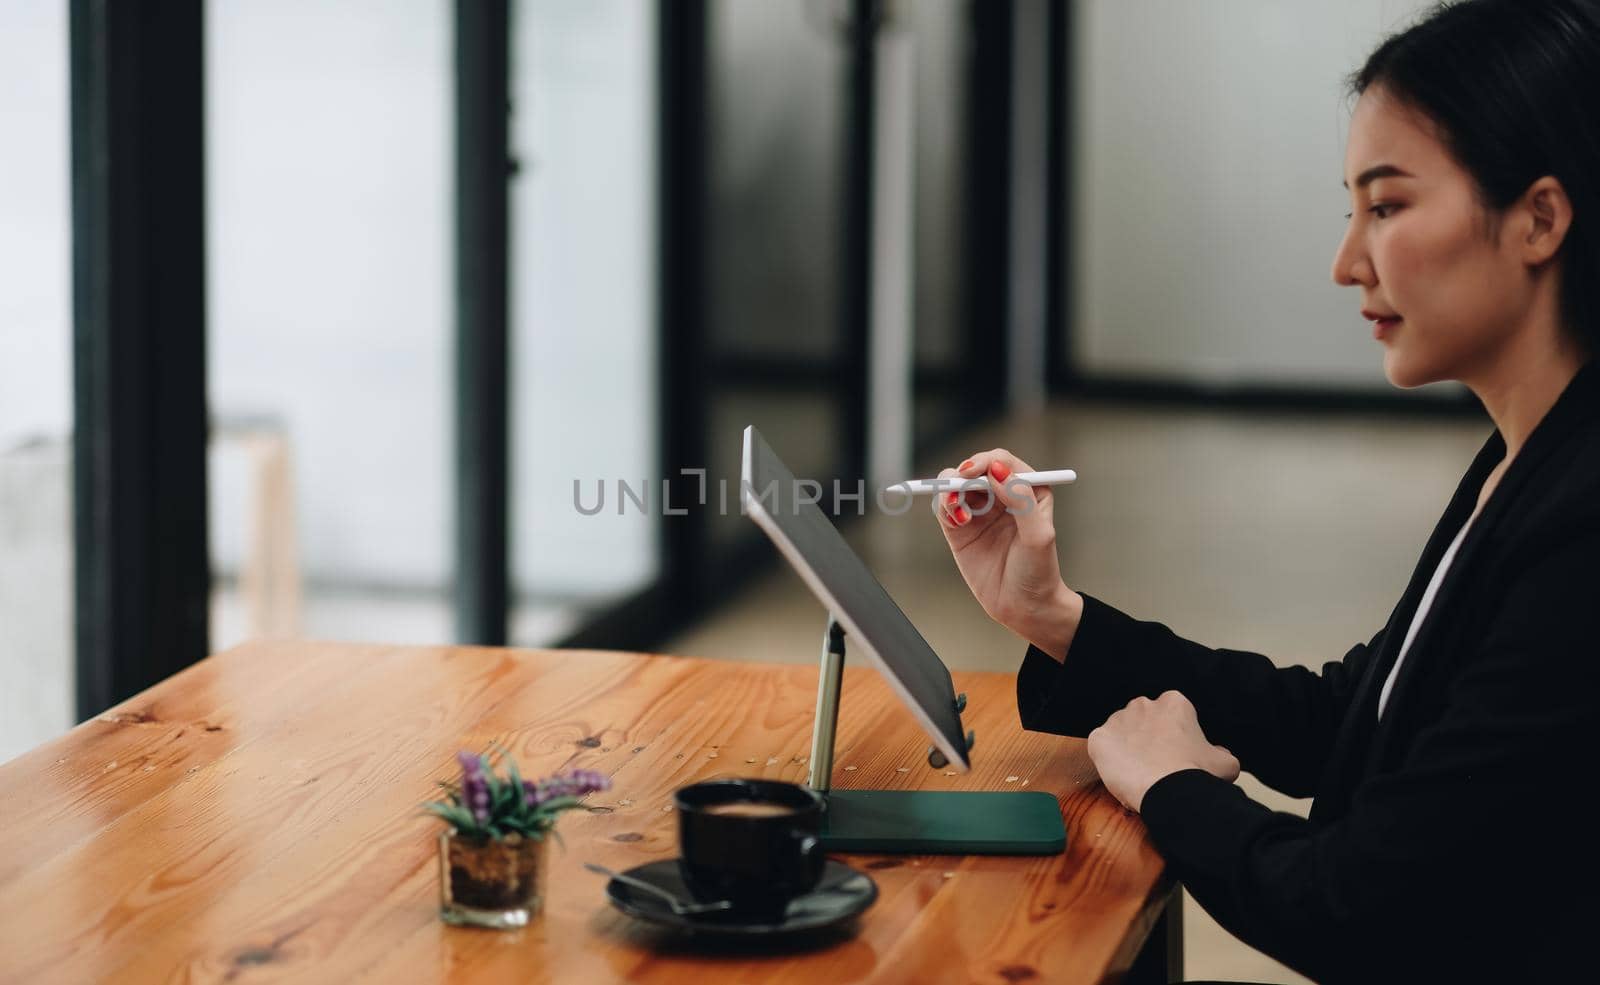 Side view of business woman holding stylus pen pointing on screen of digital tablet on wooden desk.